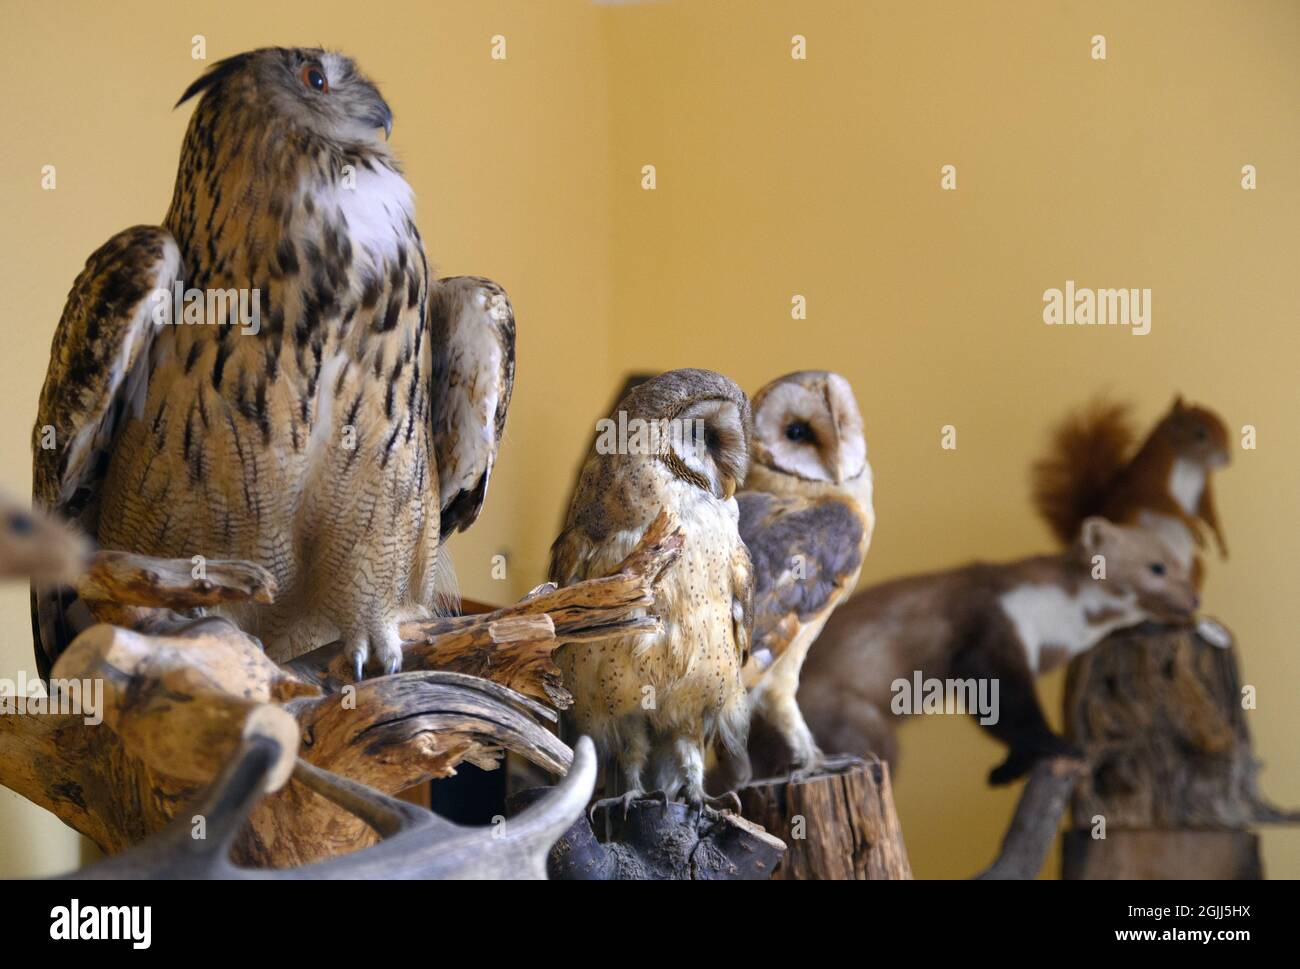 Brandenburg, Germany. September 10 2021: : Stuffed birds stand on cupboard in a classroom for school classes at the Krugpark Nature Conservation Centre in Wilhelmsdorf. The nature conservation centre has a